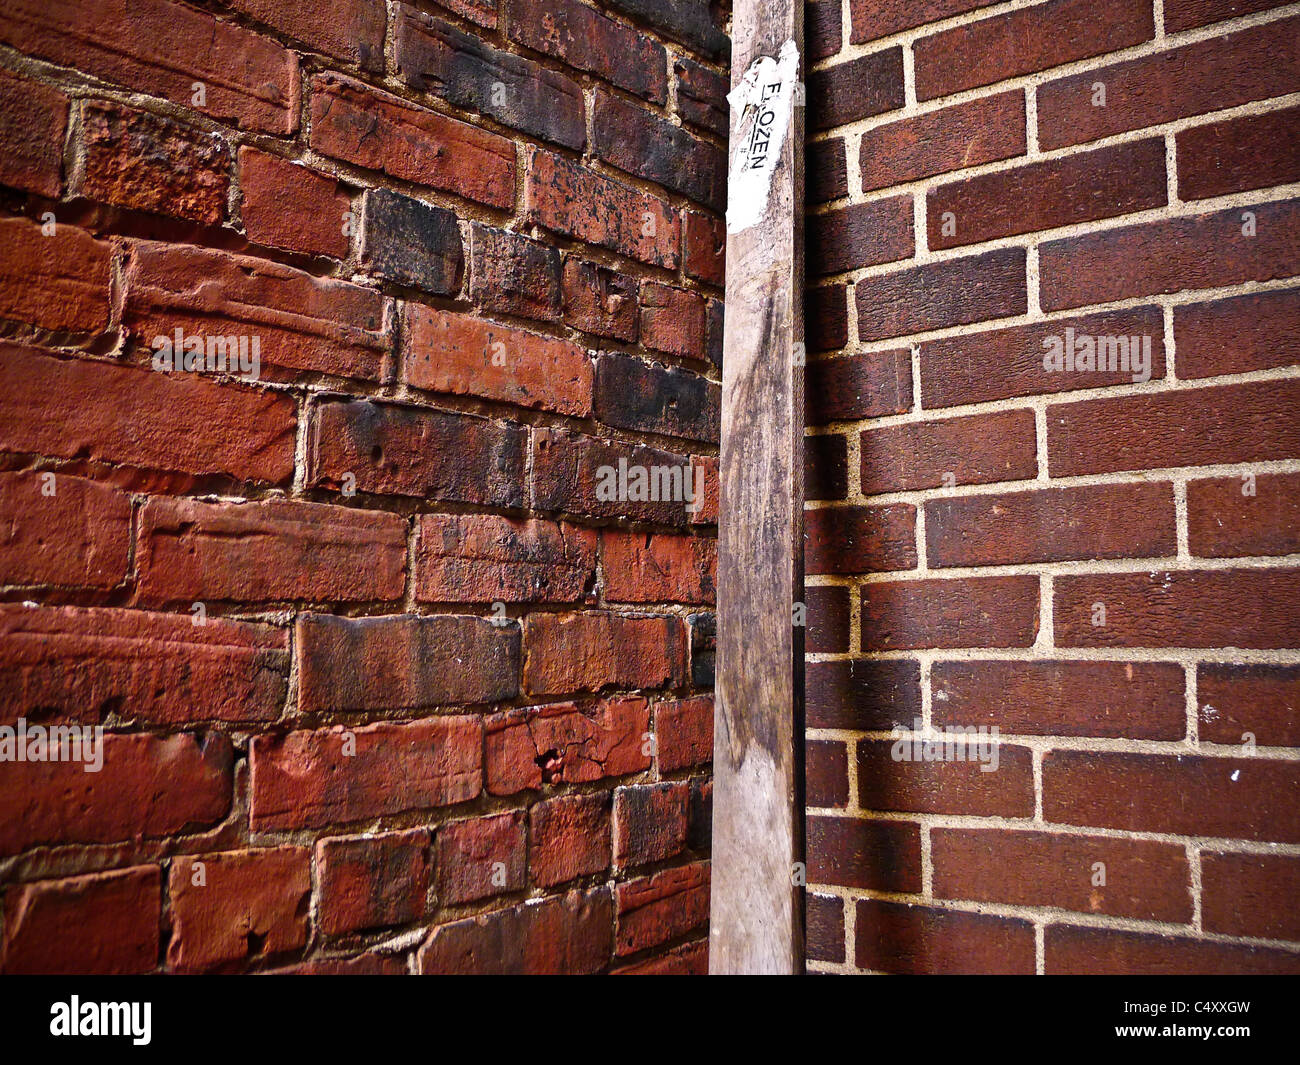 Textured surface of two brick walls. Stock Photo